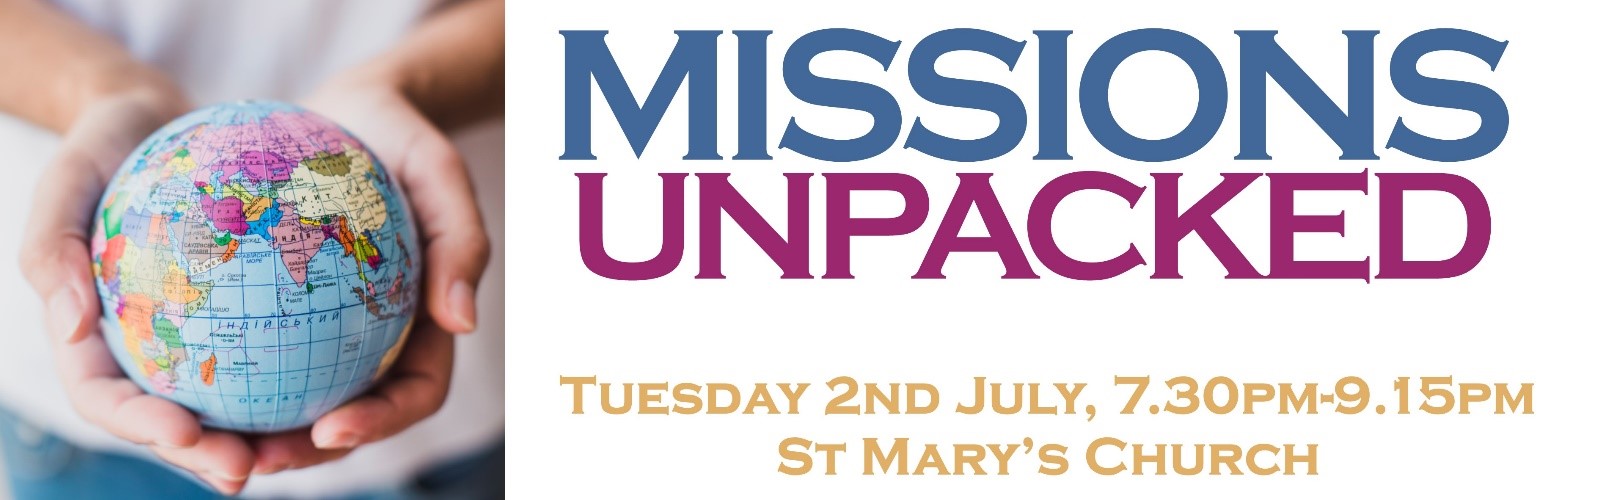 Missions unpacked